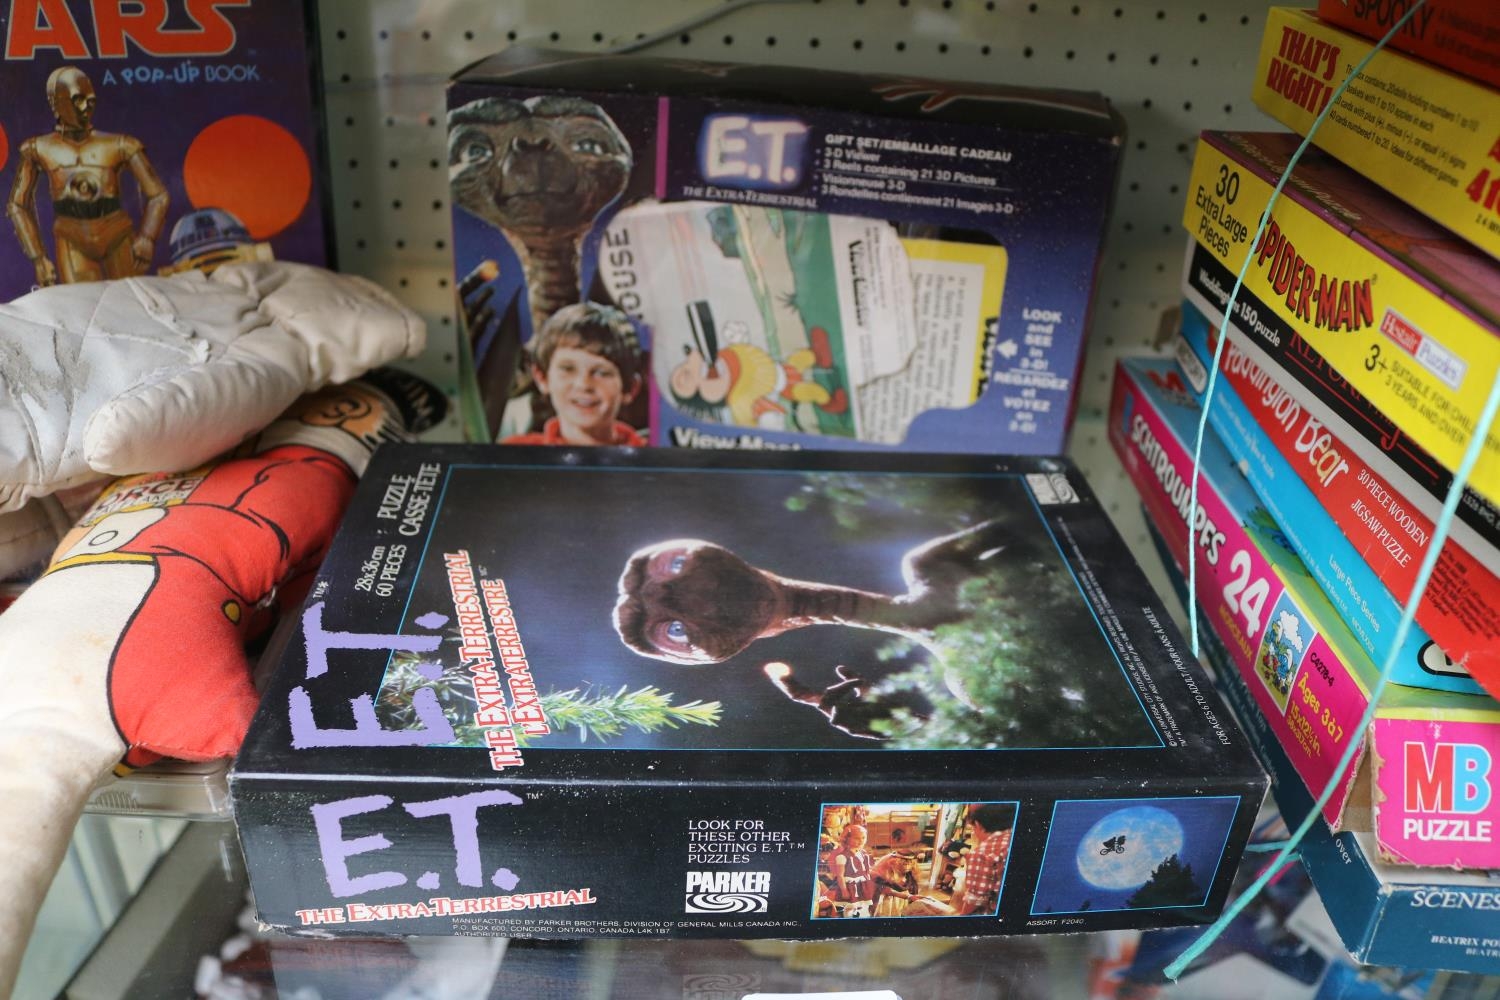 Collection of Vintage Games inc. ET Viewmaster, Star Wars Pop Up Book, Waddington Card Games etc - Image 3 of 3